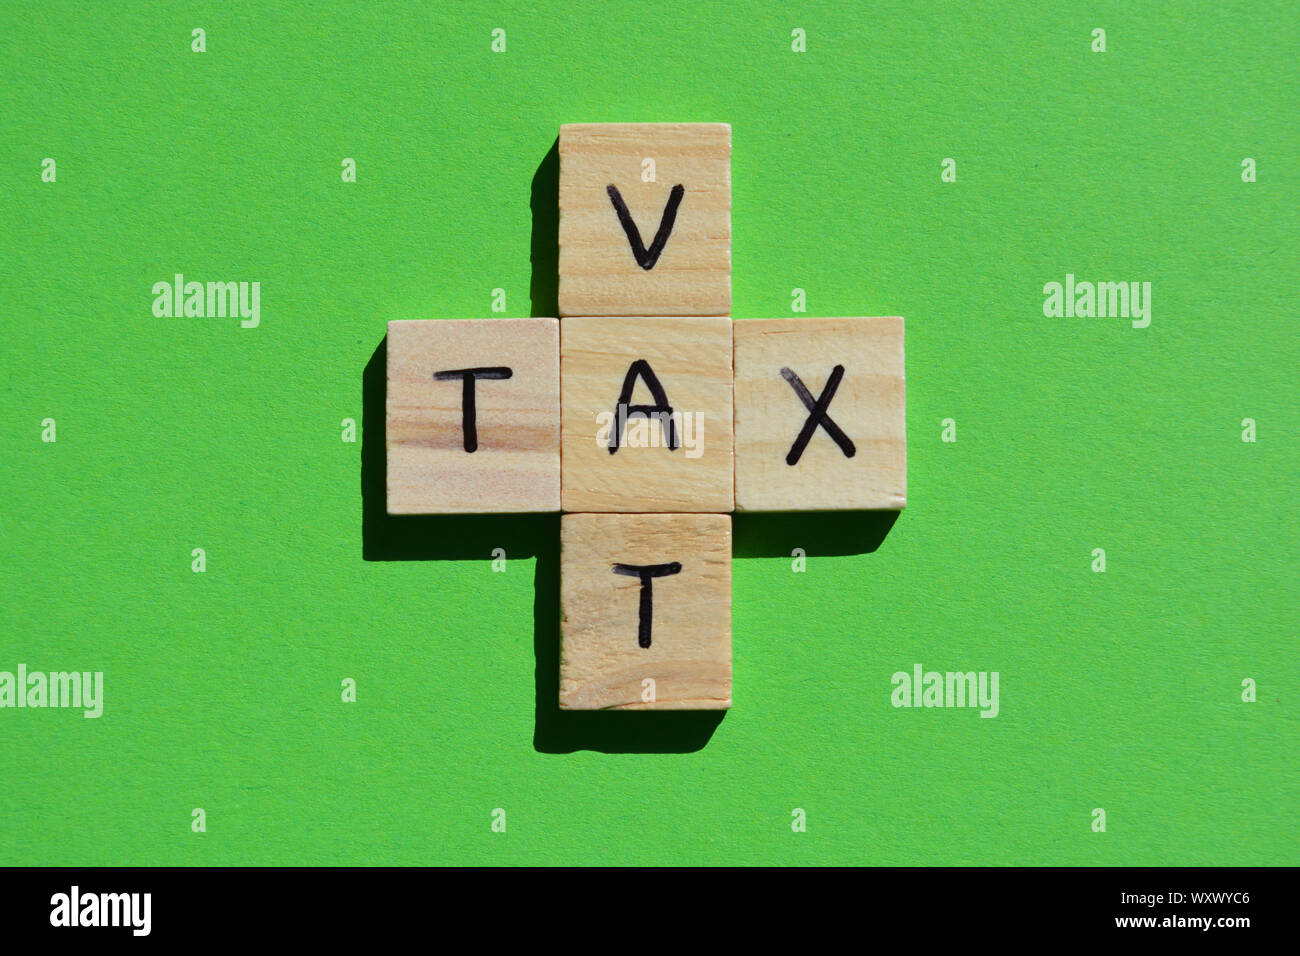 VAT (acronym for Value Added Tax) and Tax in 3d wooden alphabet letters on a bright green background Stock Photo